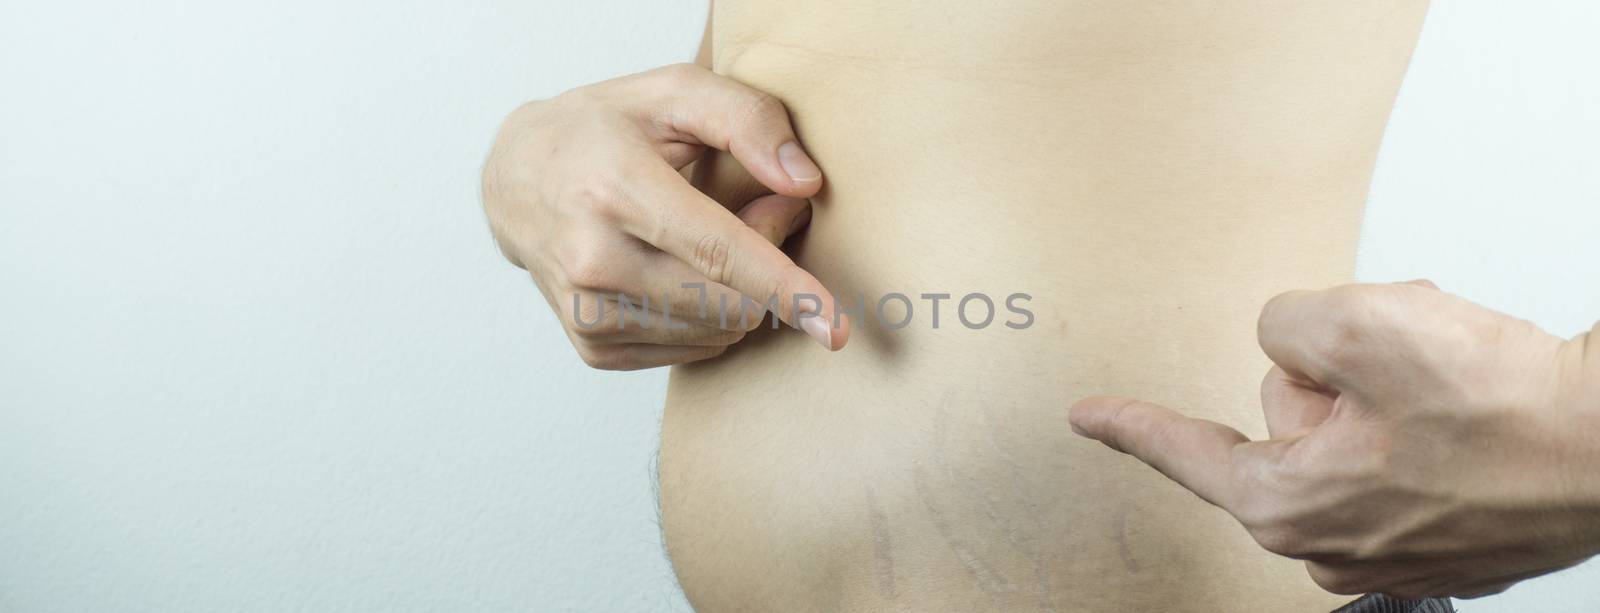 Man showing and pointing to the belly with stretch marks on whit by mikesaran